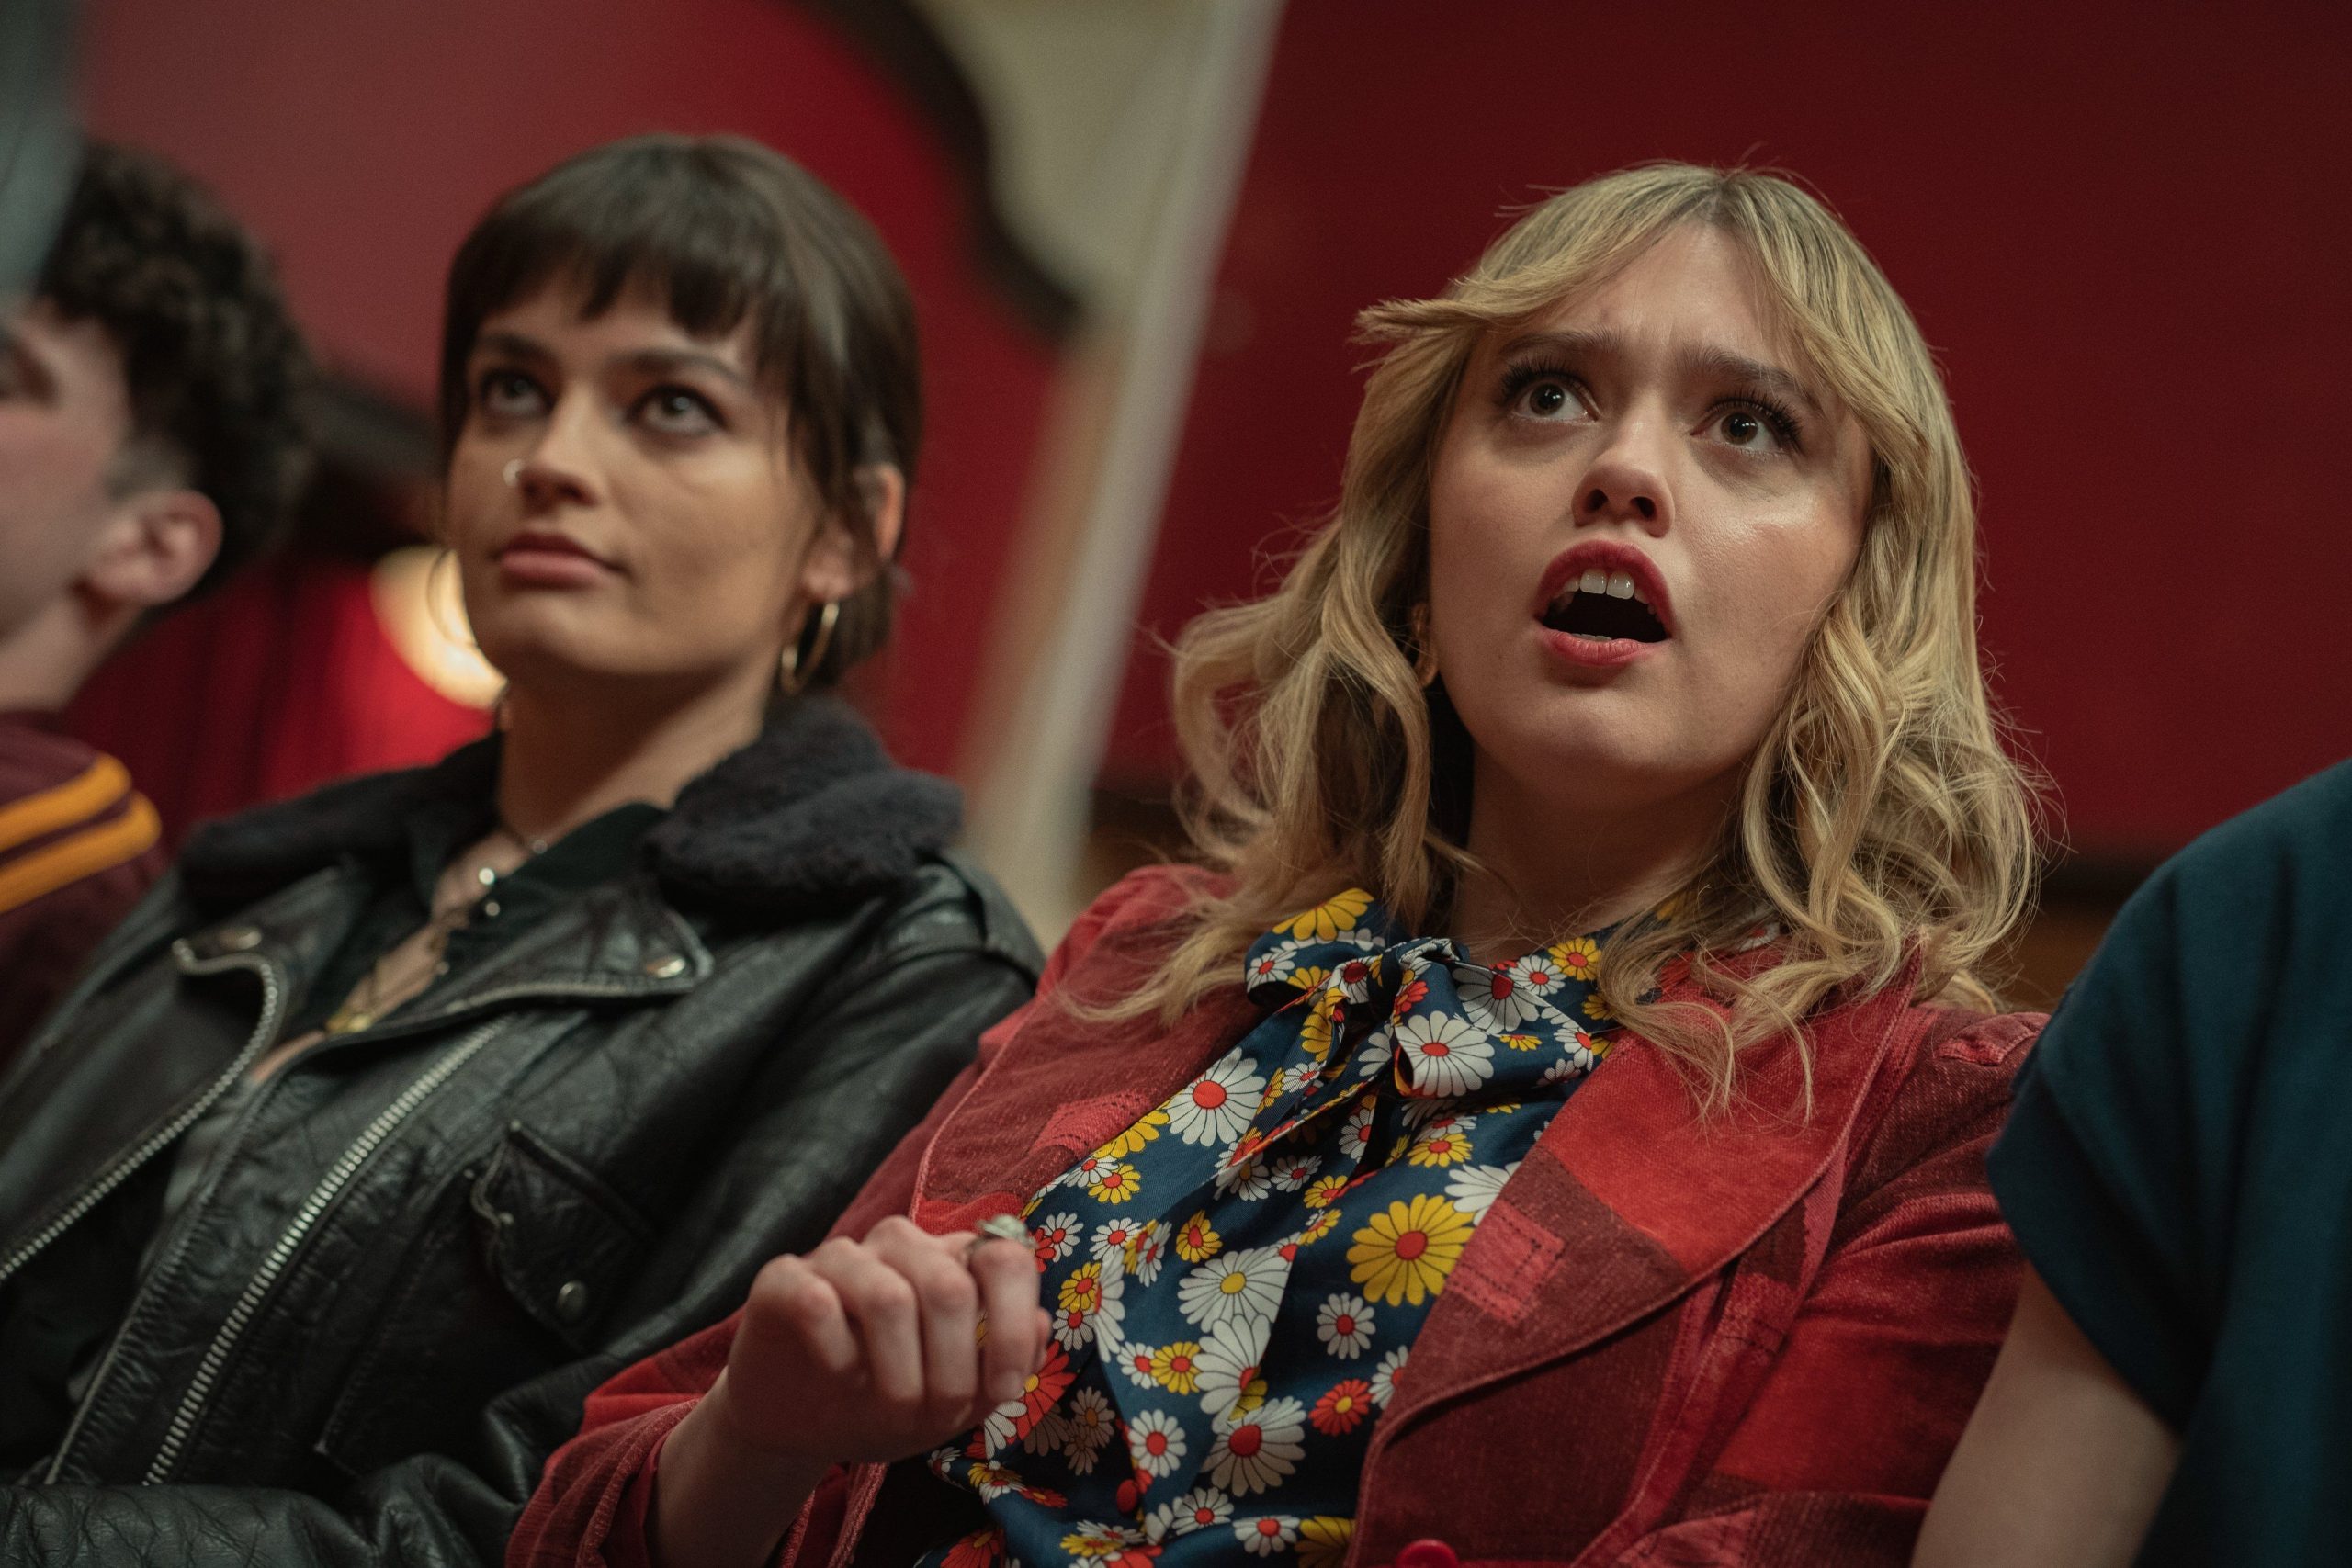 Sex Education S3 Review: Otis, Maeve and the new ‘Sex King’ of Moordale High